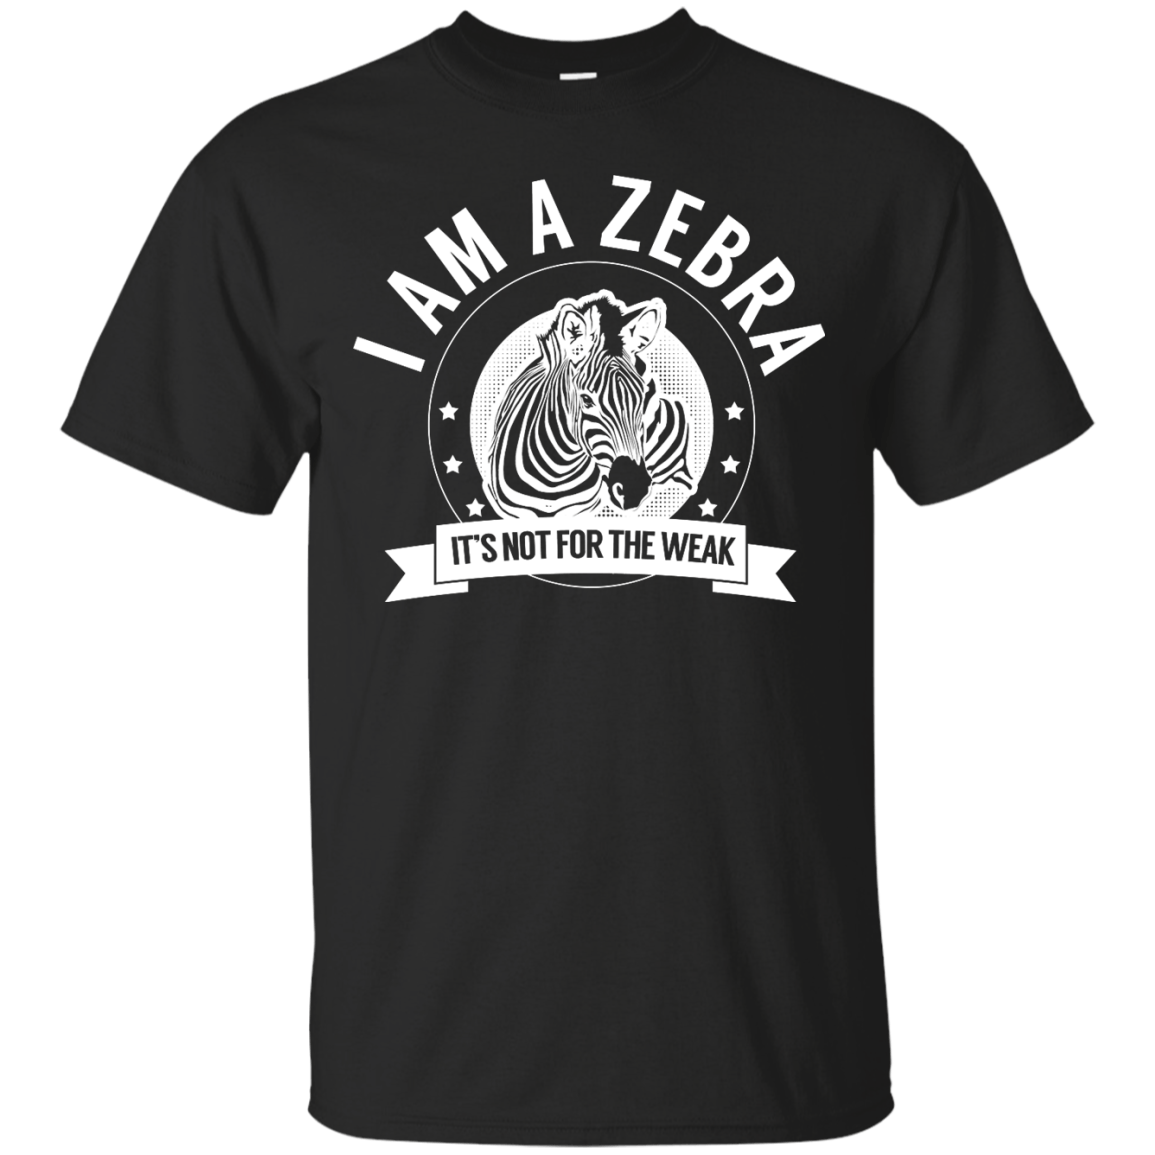 Zebra Warrior Not for the Weak Unisex Shirt - The Unchargeables